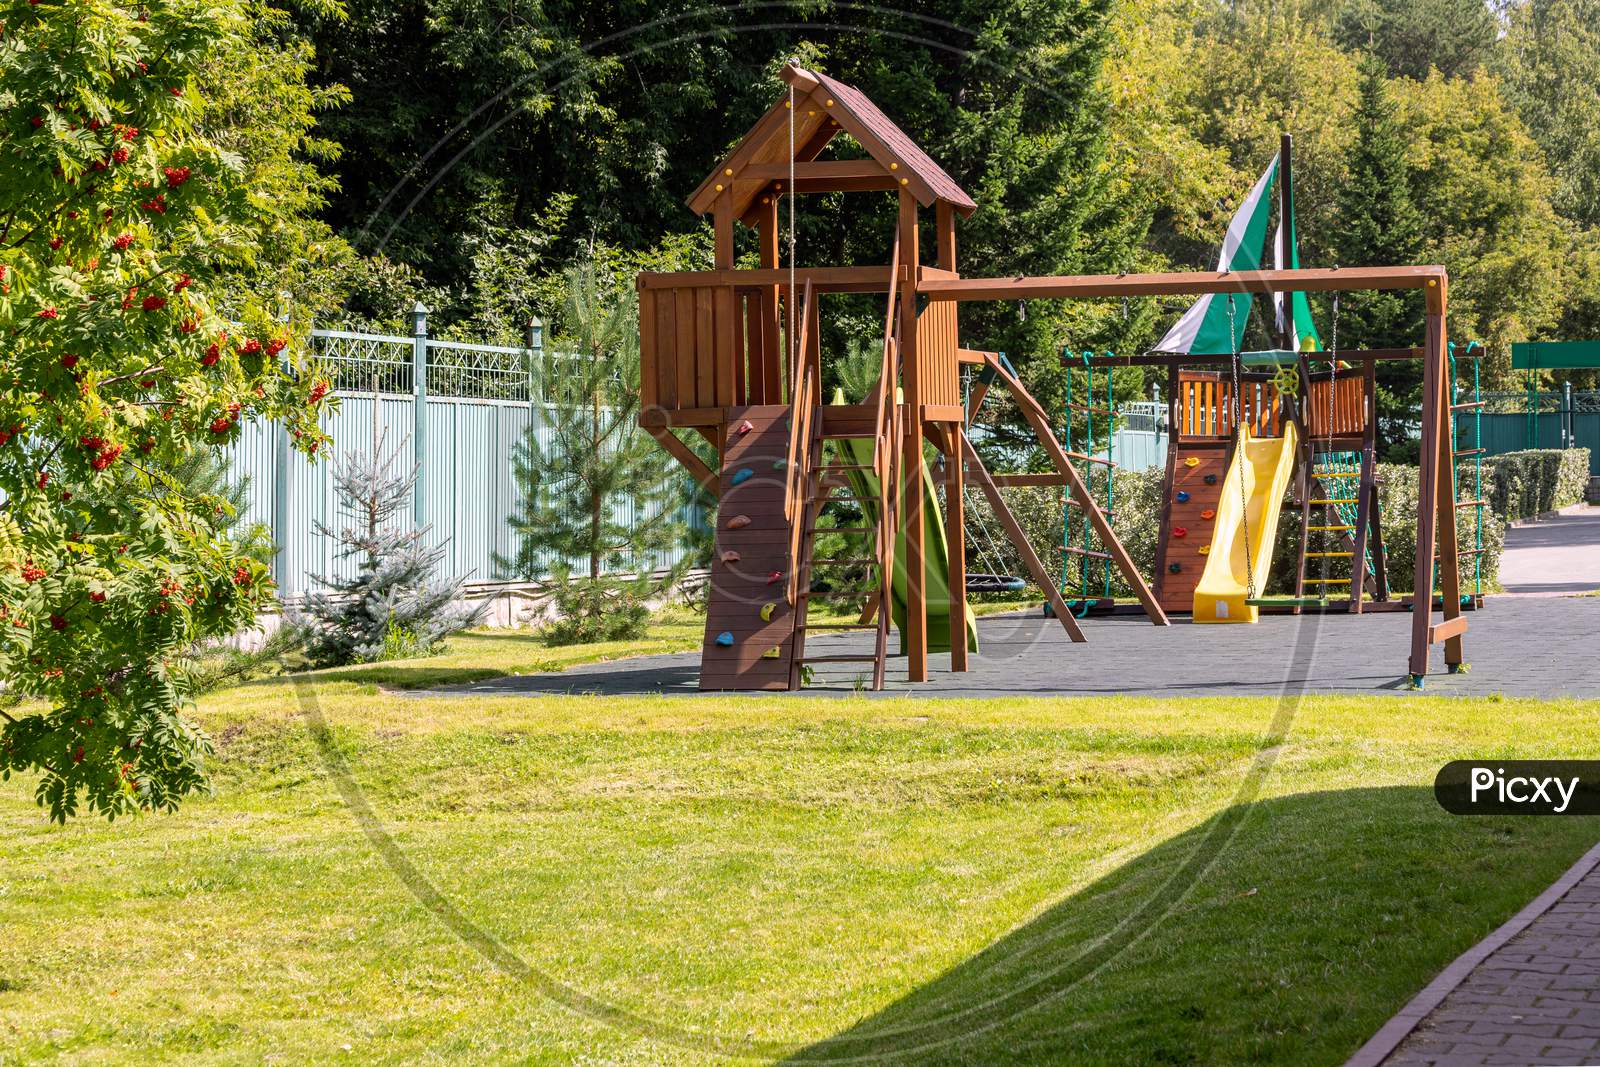 Empty Playground For Children For Leisure And Recreation With A Toy In The Park As A Child In A Natural Style. Playground In A Swing For Mom And Baby